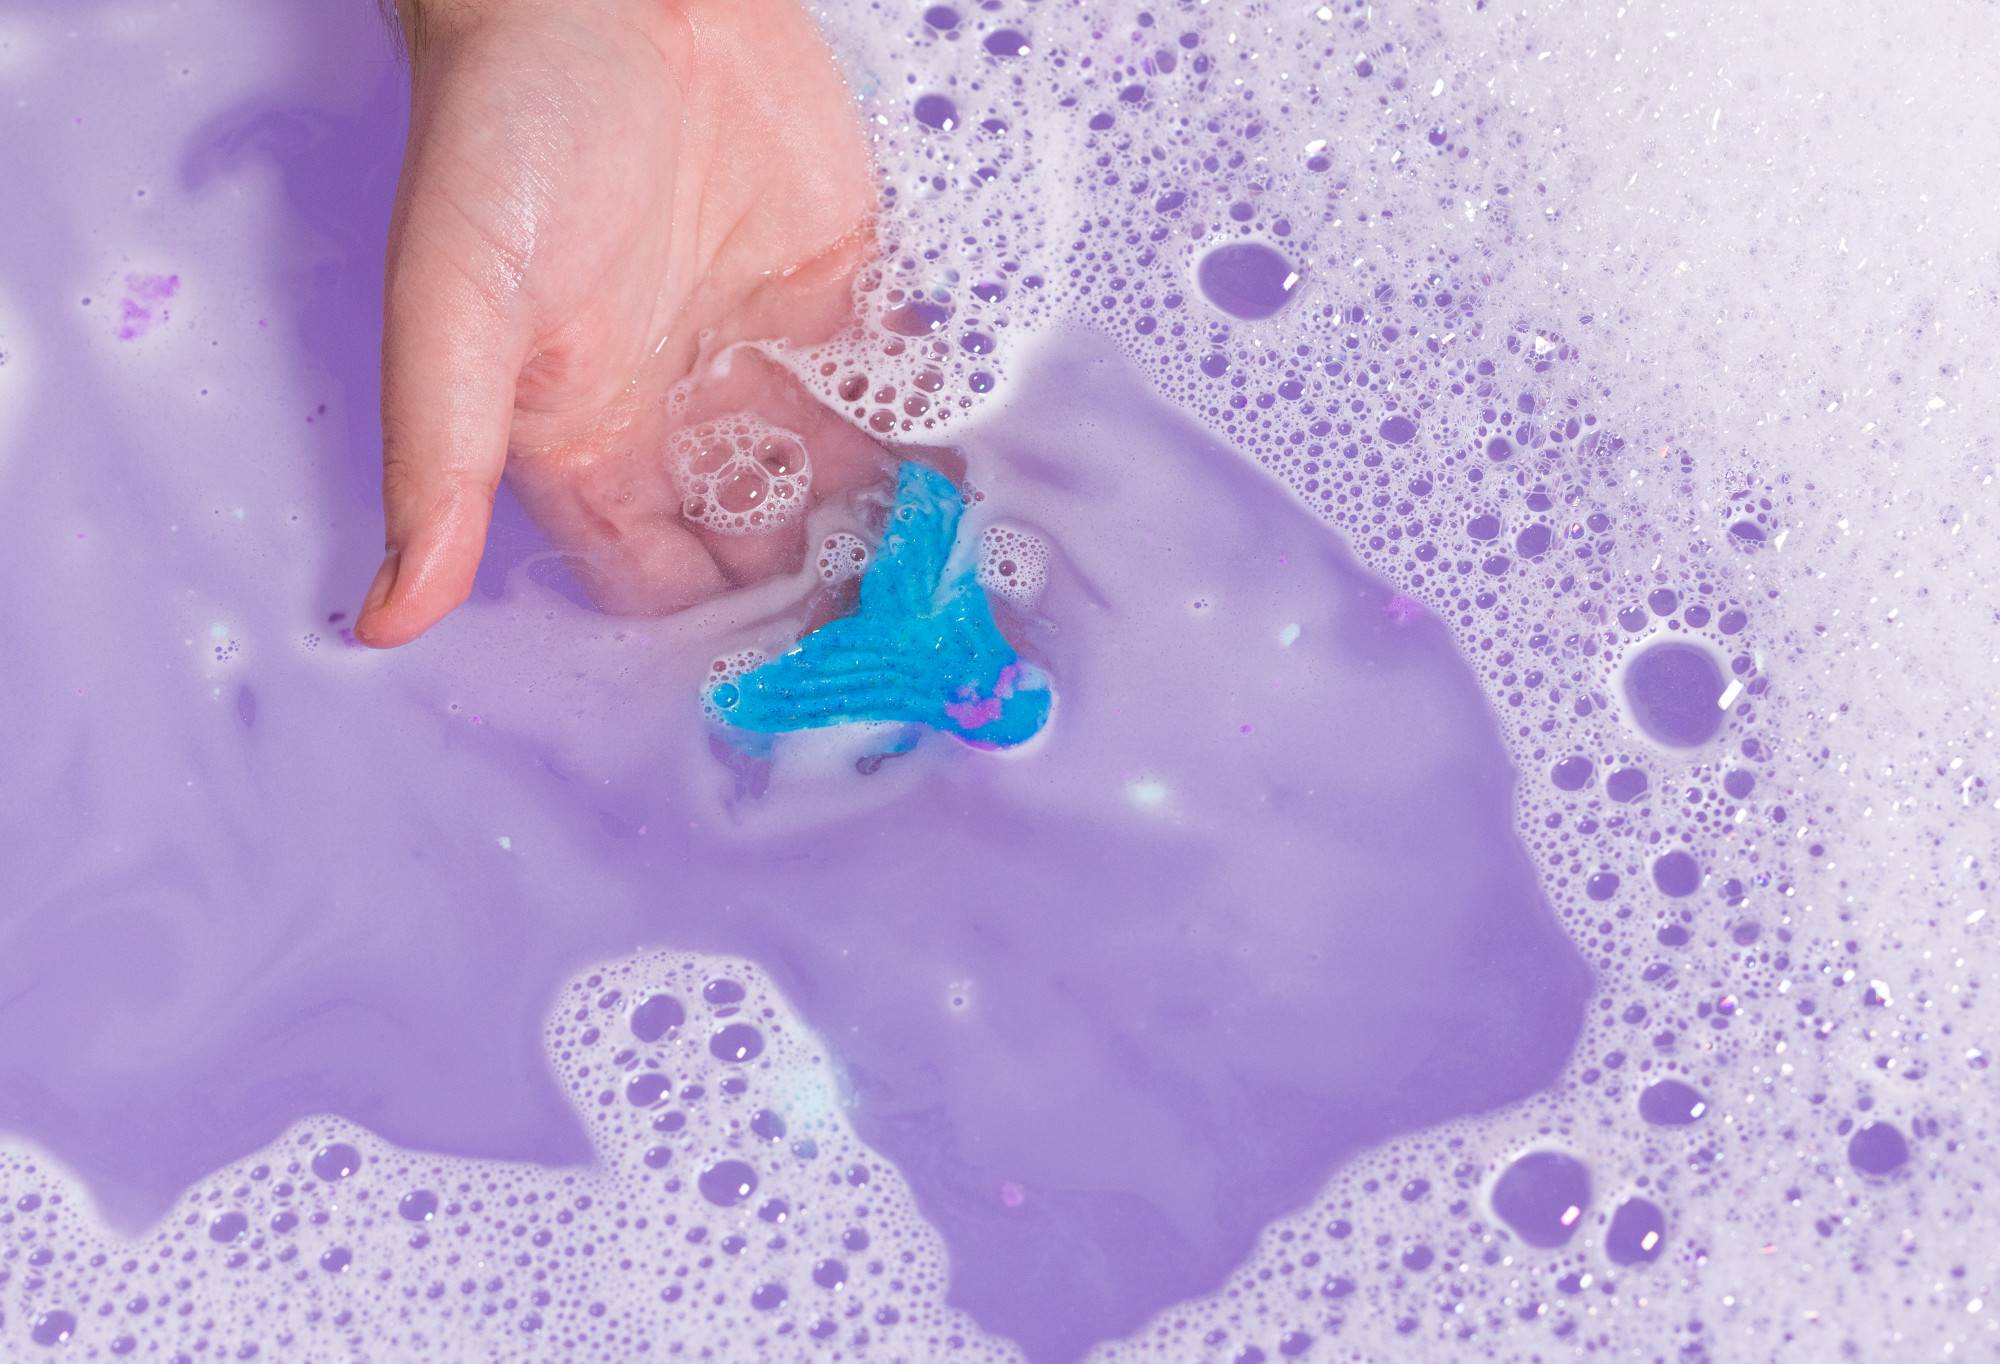 A hand holds the Mermaid Tail in purple water. All that is visible is the blue fin with bubbles forming on the surface.